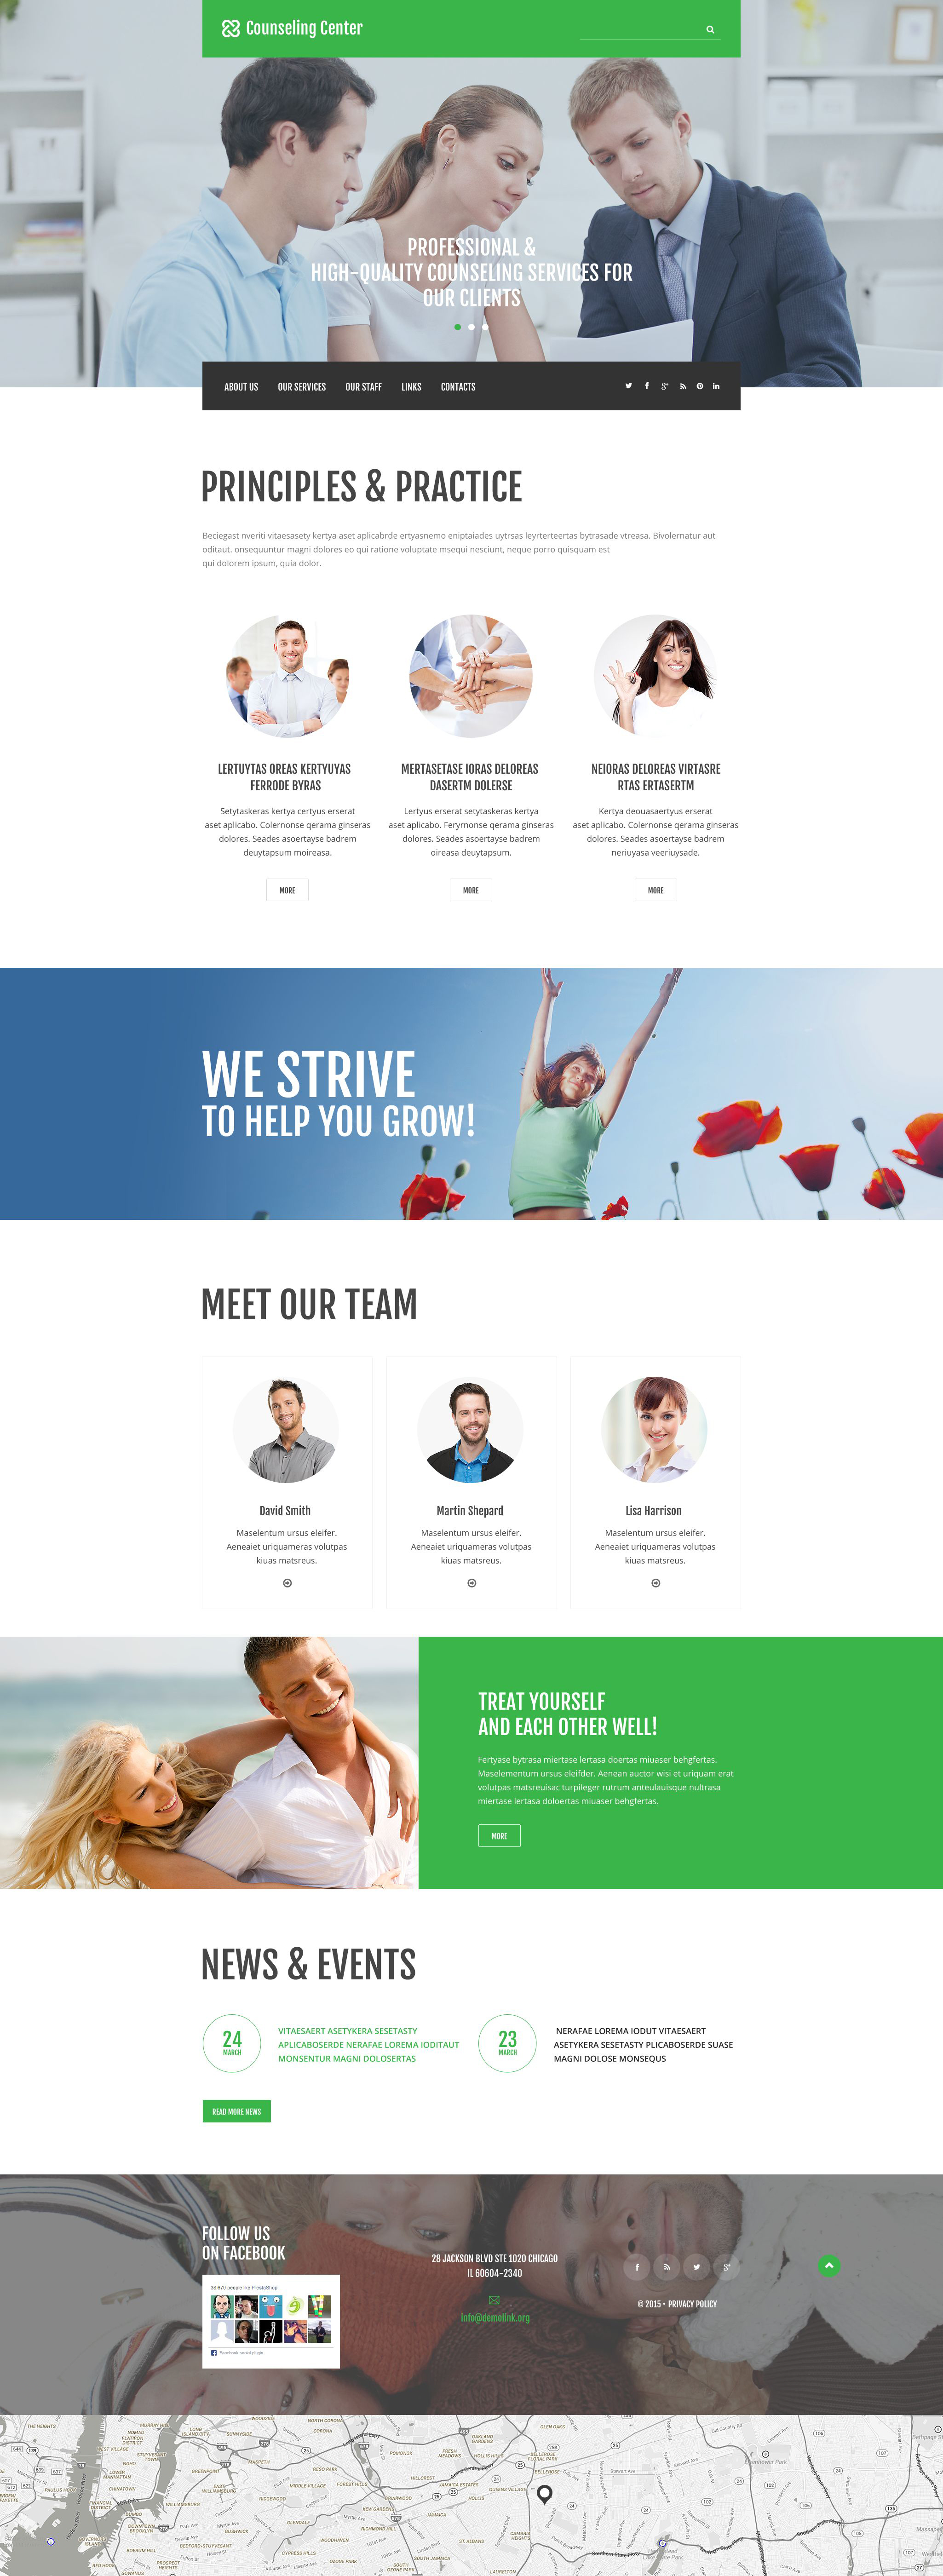 Counseling Center Website Template